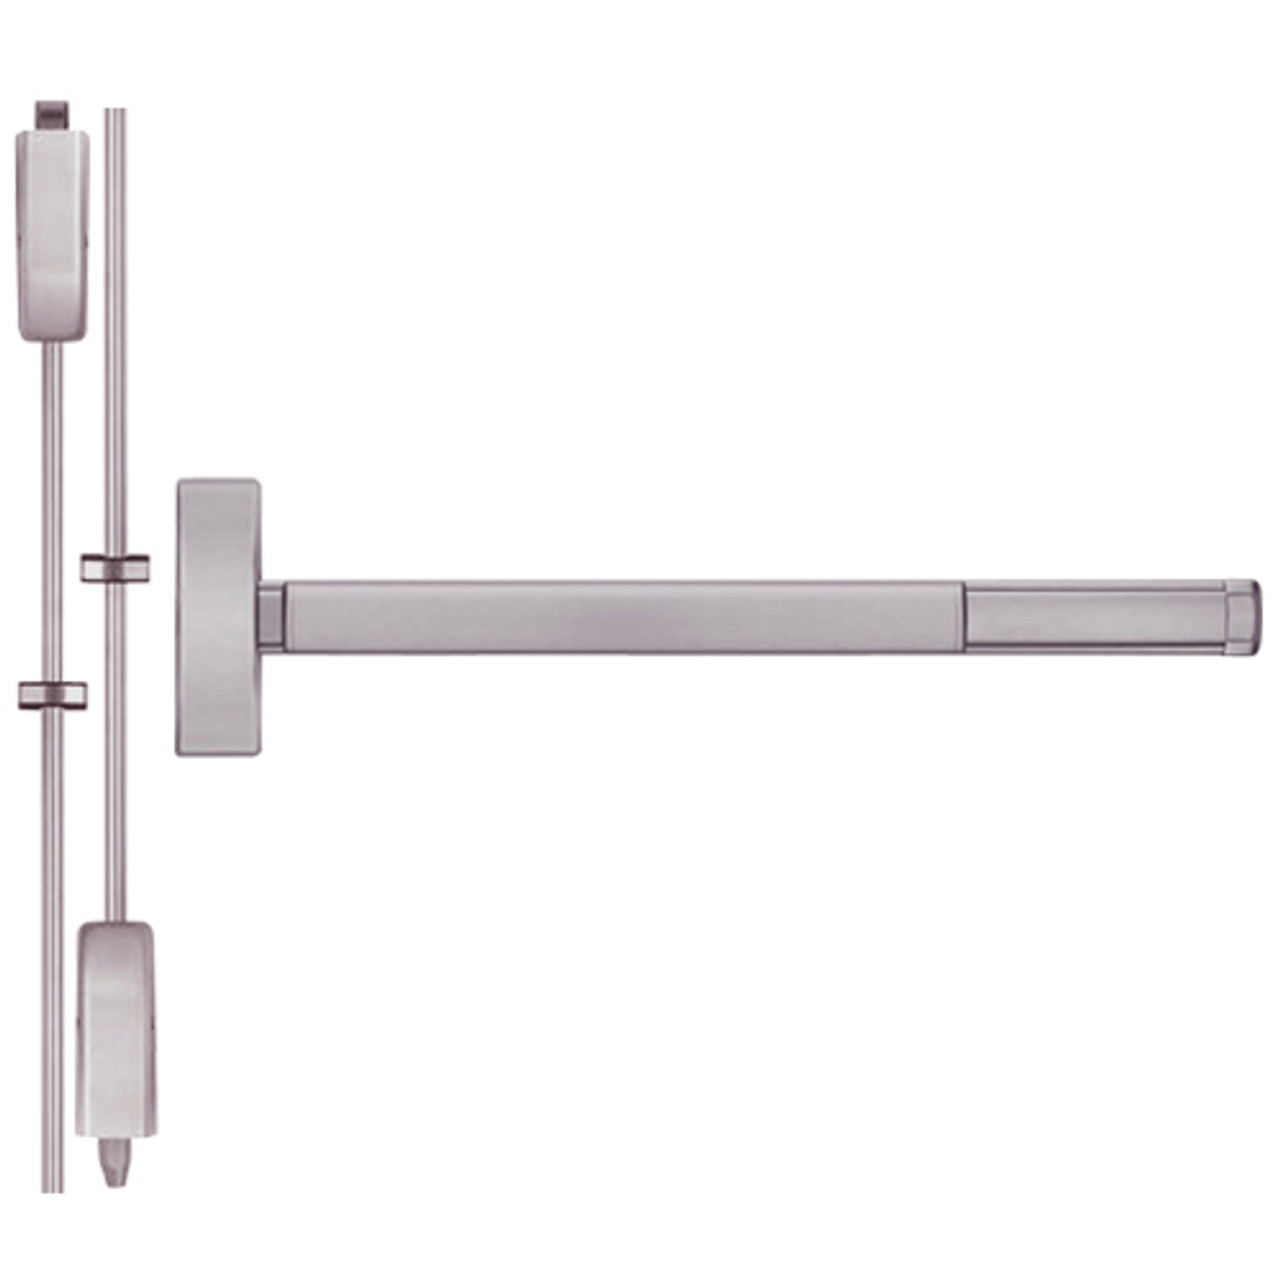 2215CD-630-36 PHI 2200 Series Non Fire Rated Apex Surface Vertical Rod Exit Device Prepped for Thumb Piece Always Active with Cylinder Dogging in Satin Stainless Steel Finish